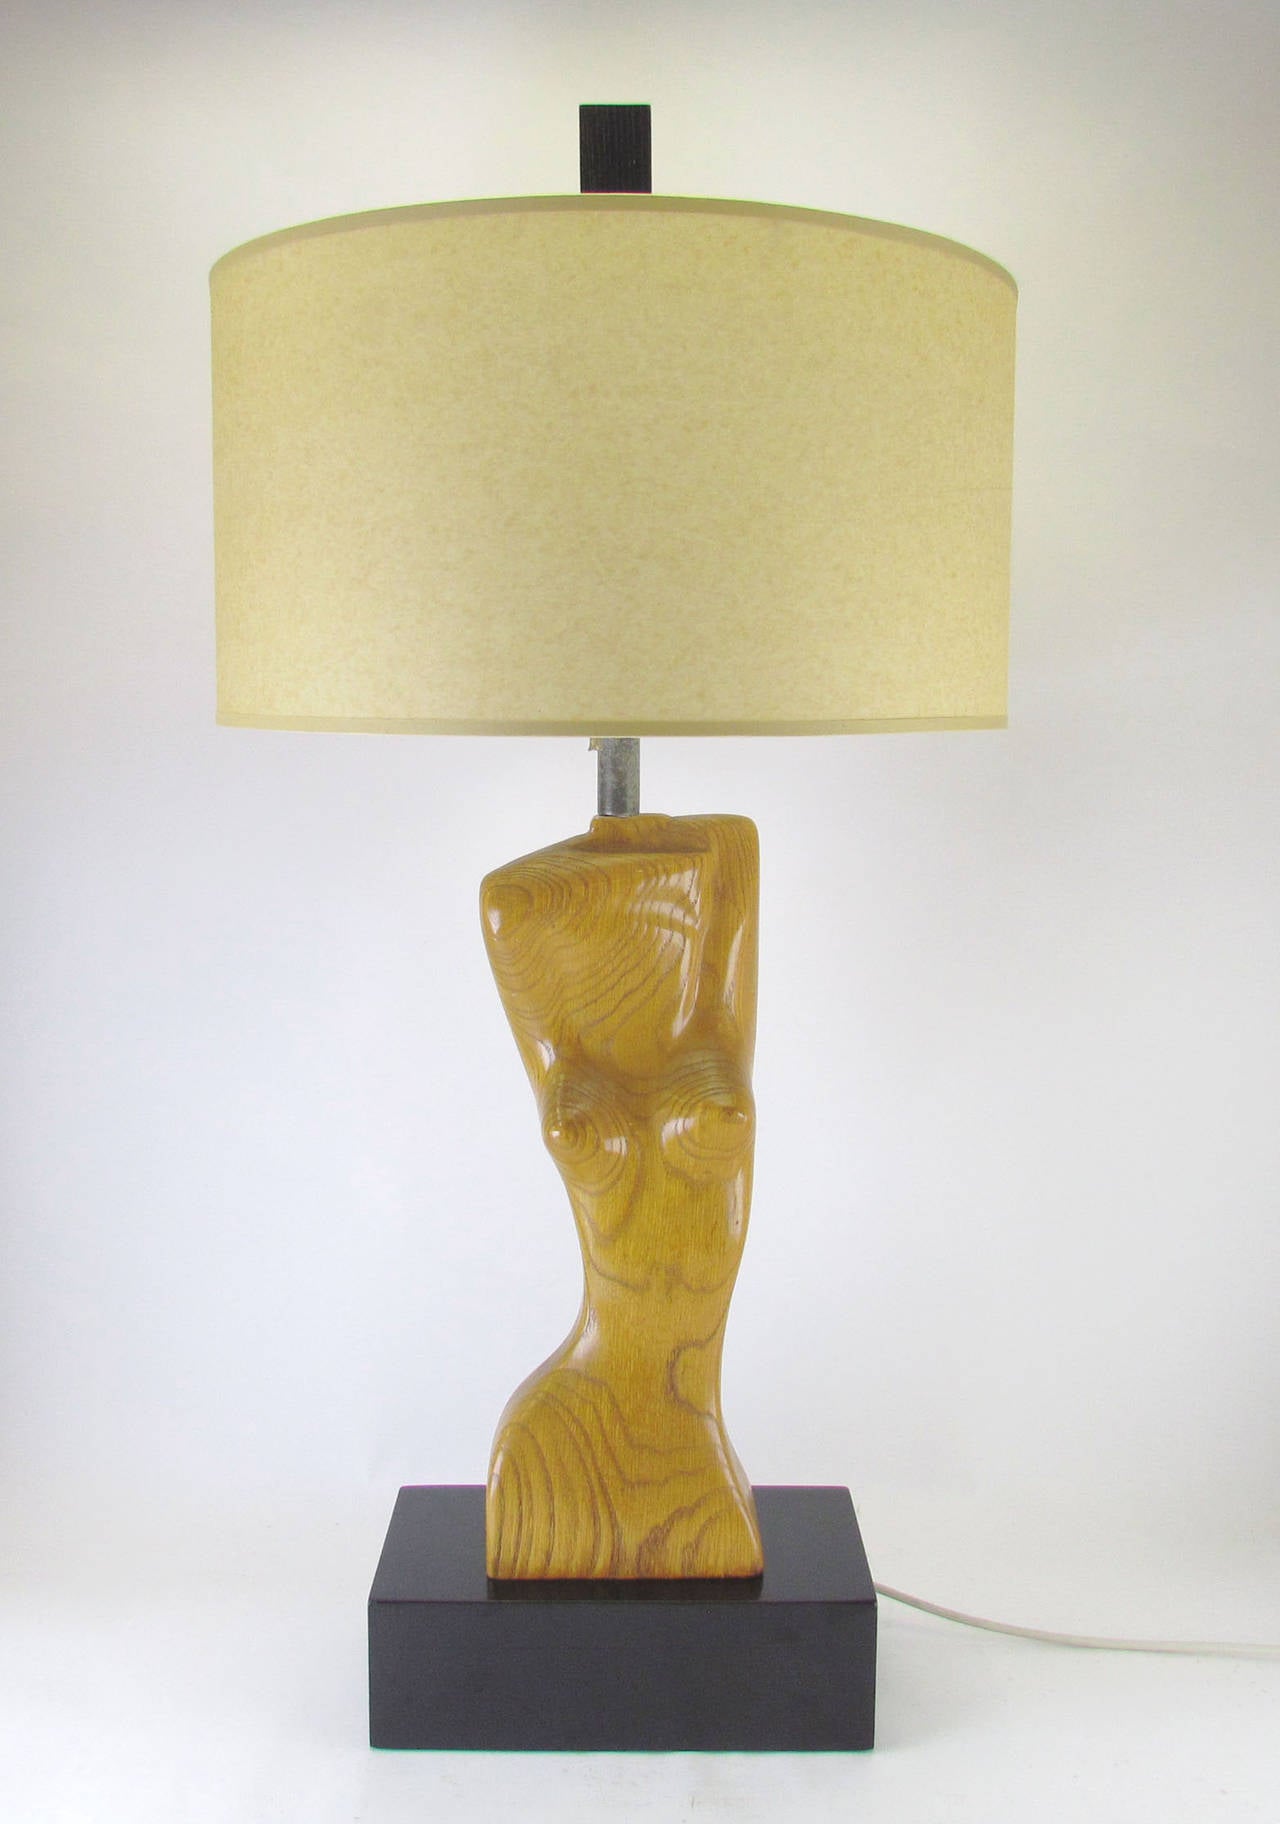 Female form torso table lamp in carved oak on a lacquered pedestal, attributed to Yasha Heifetz, circa 1950s.

Measures: 38